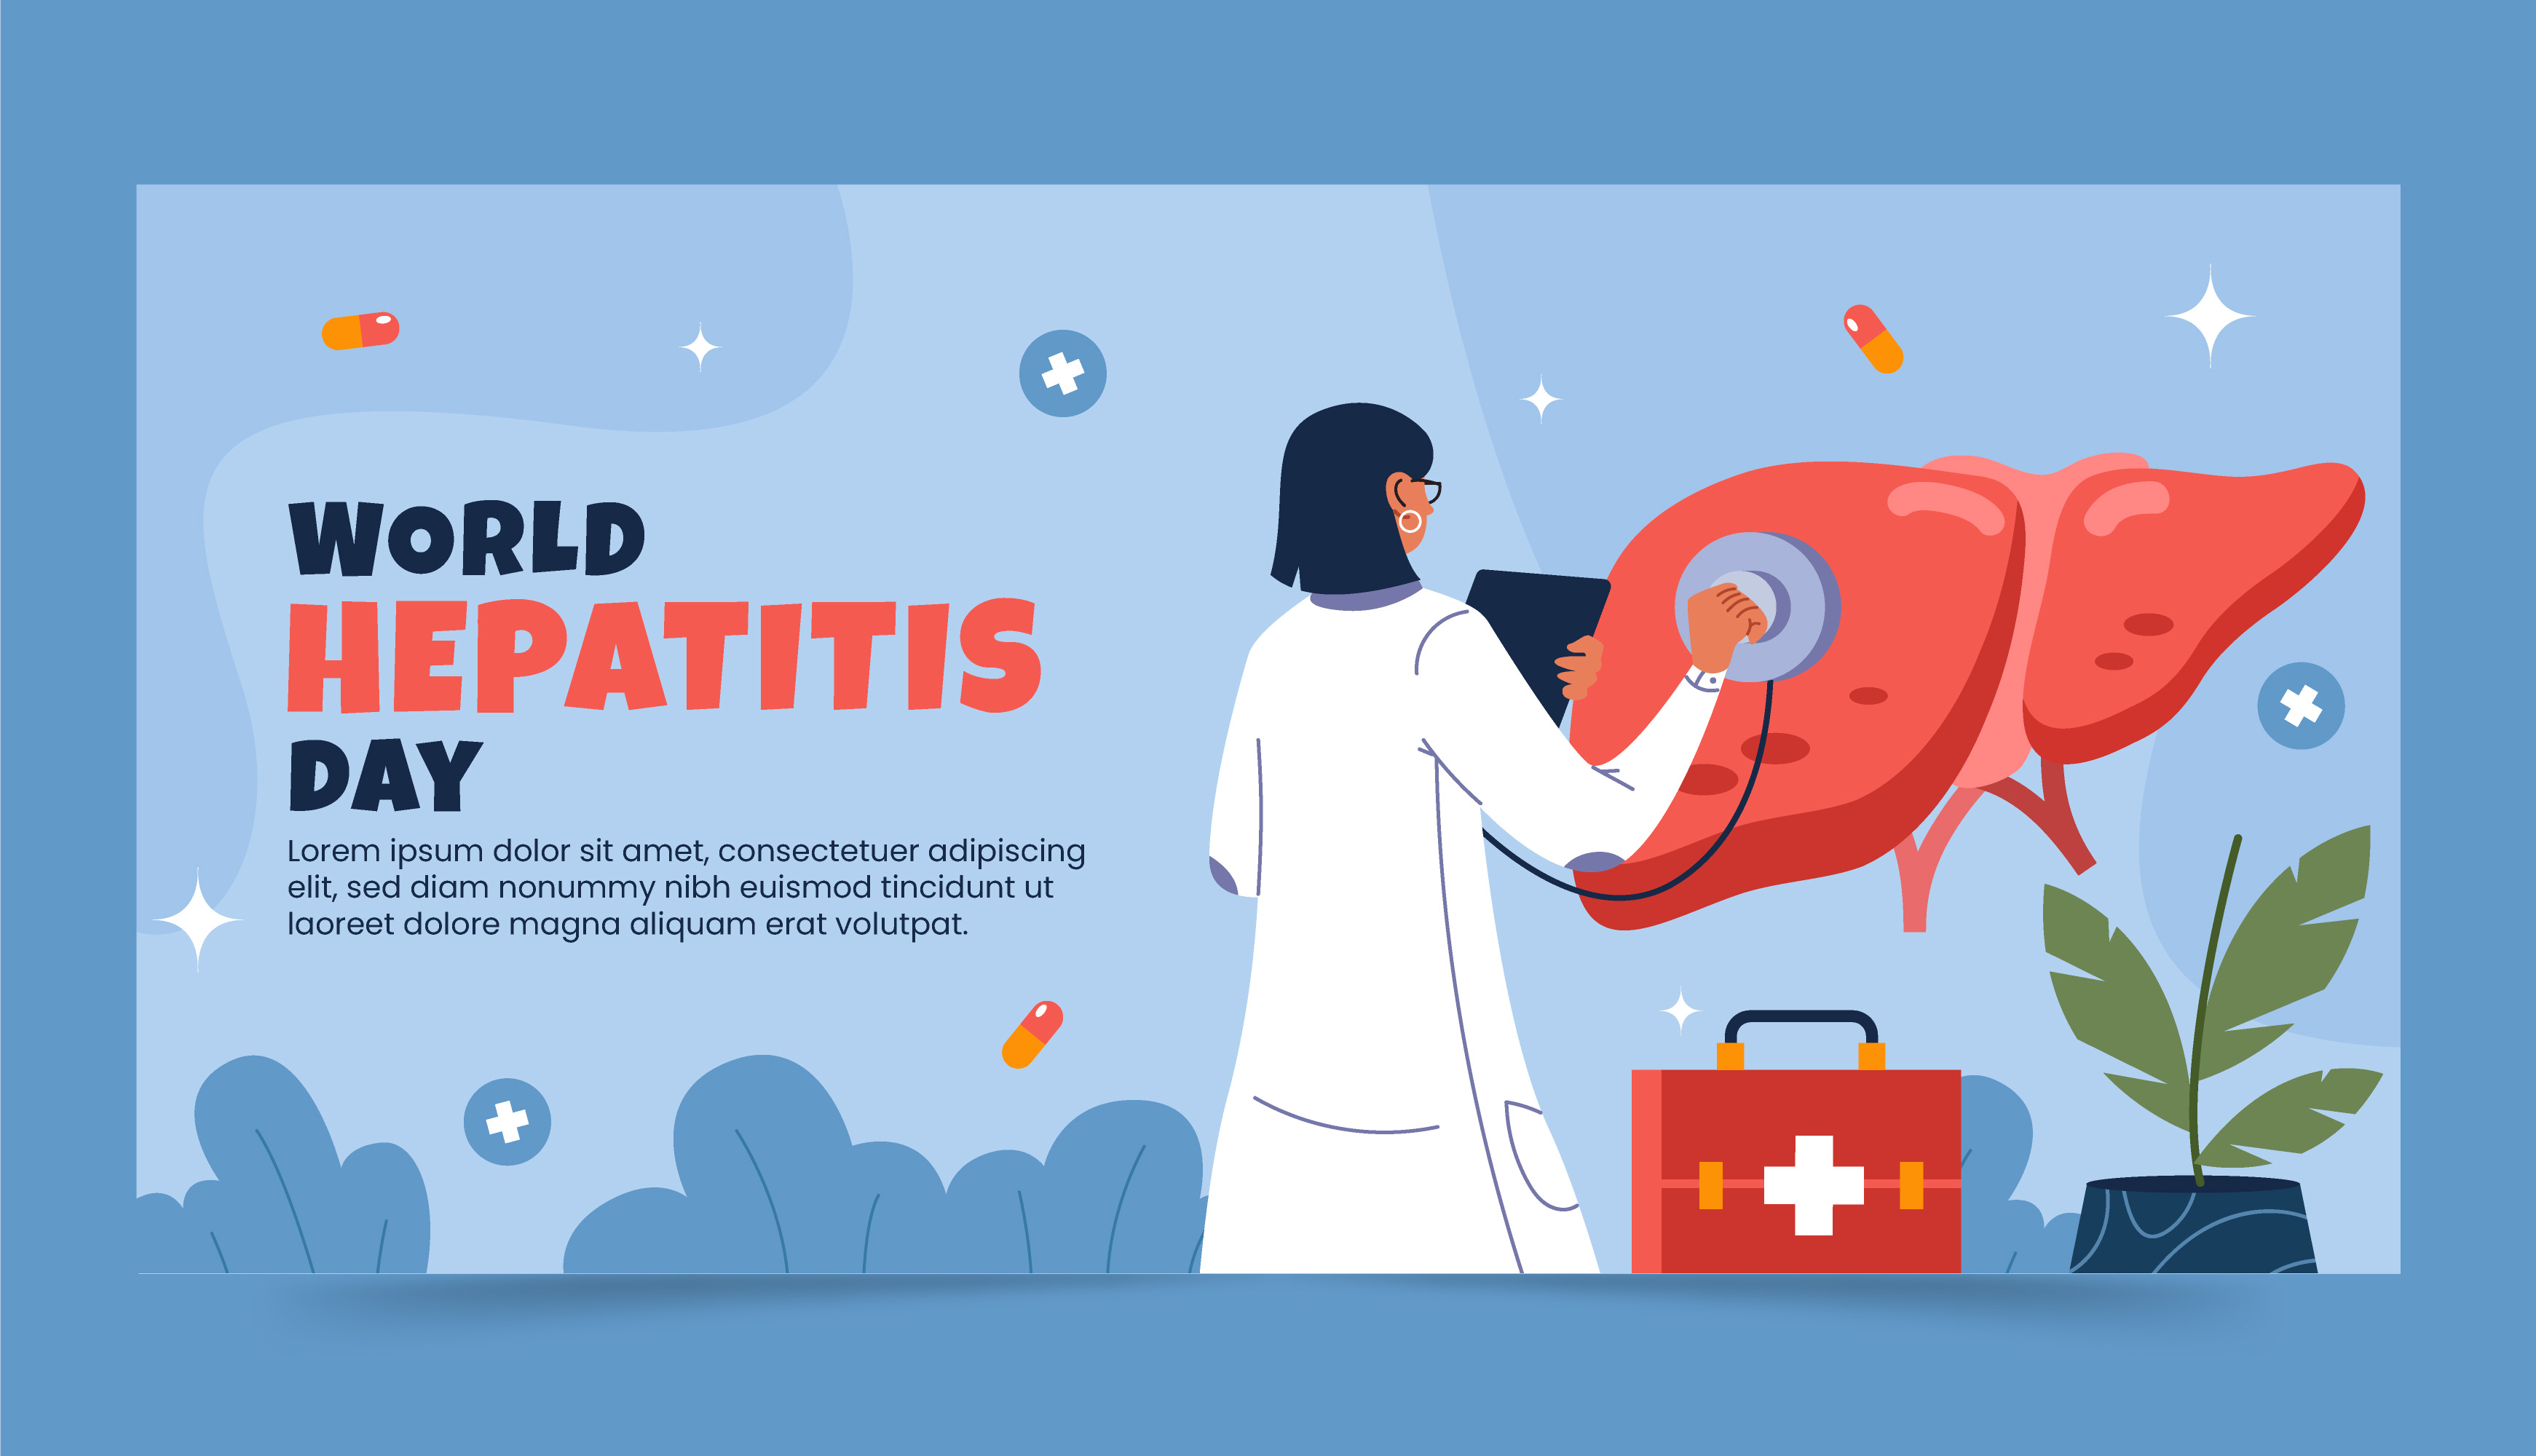 Hepatitis E Awareness Campaigns: Spreading Knowledge and Encouraging Testing